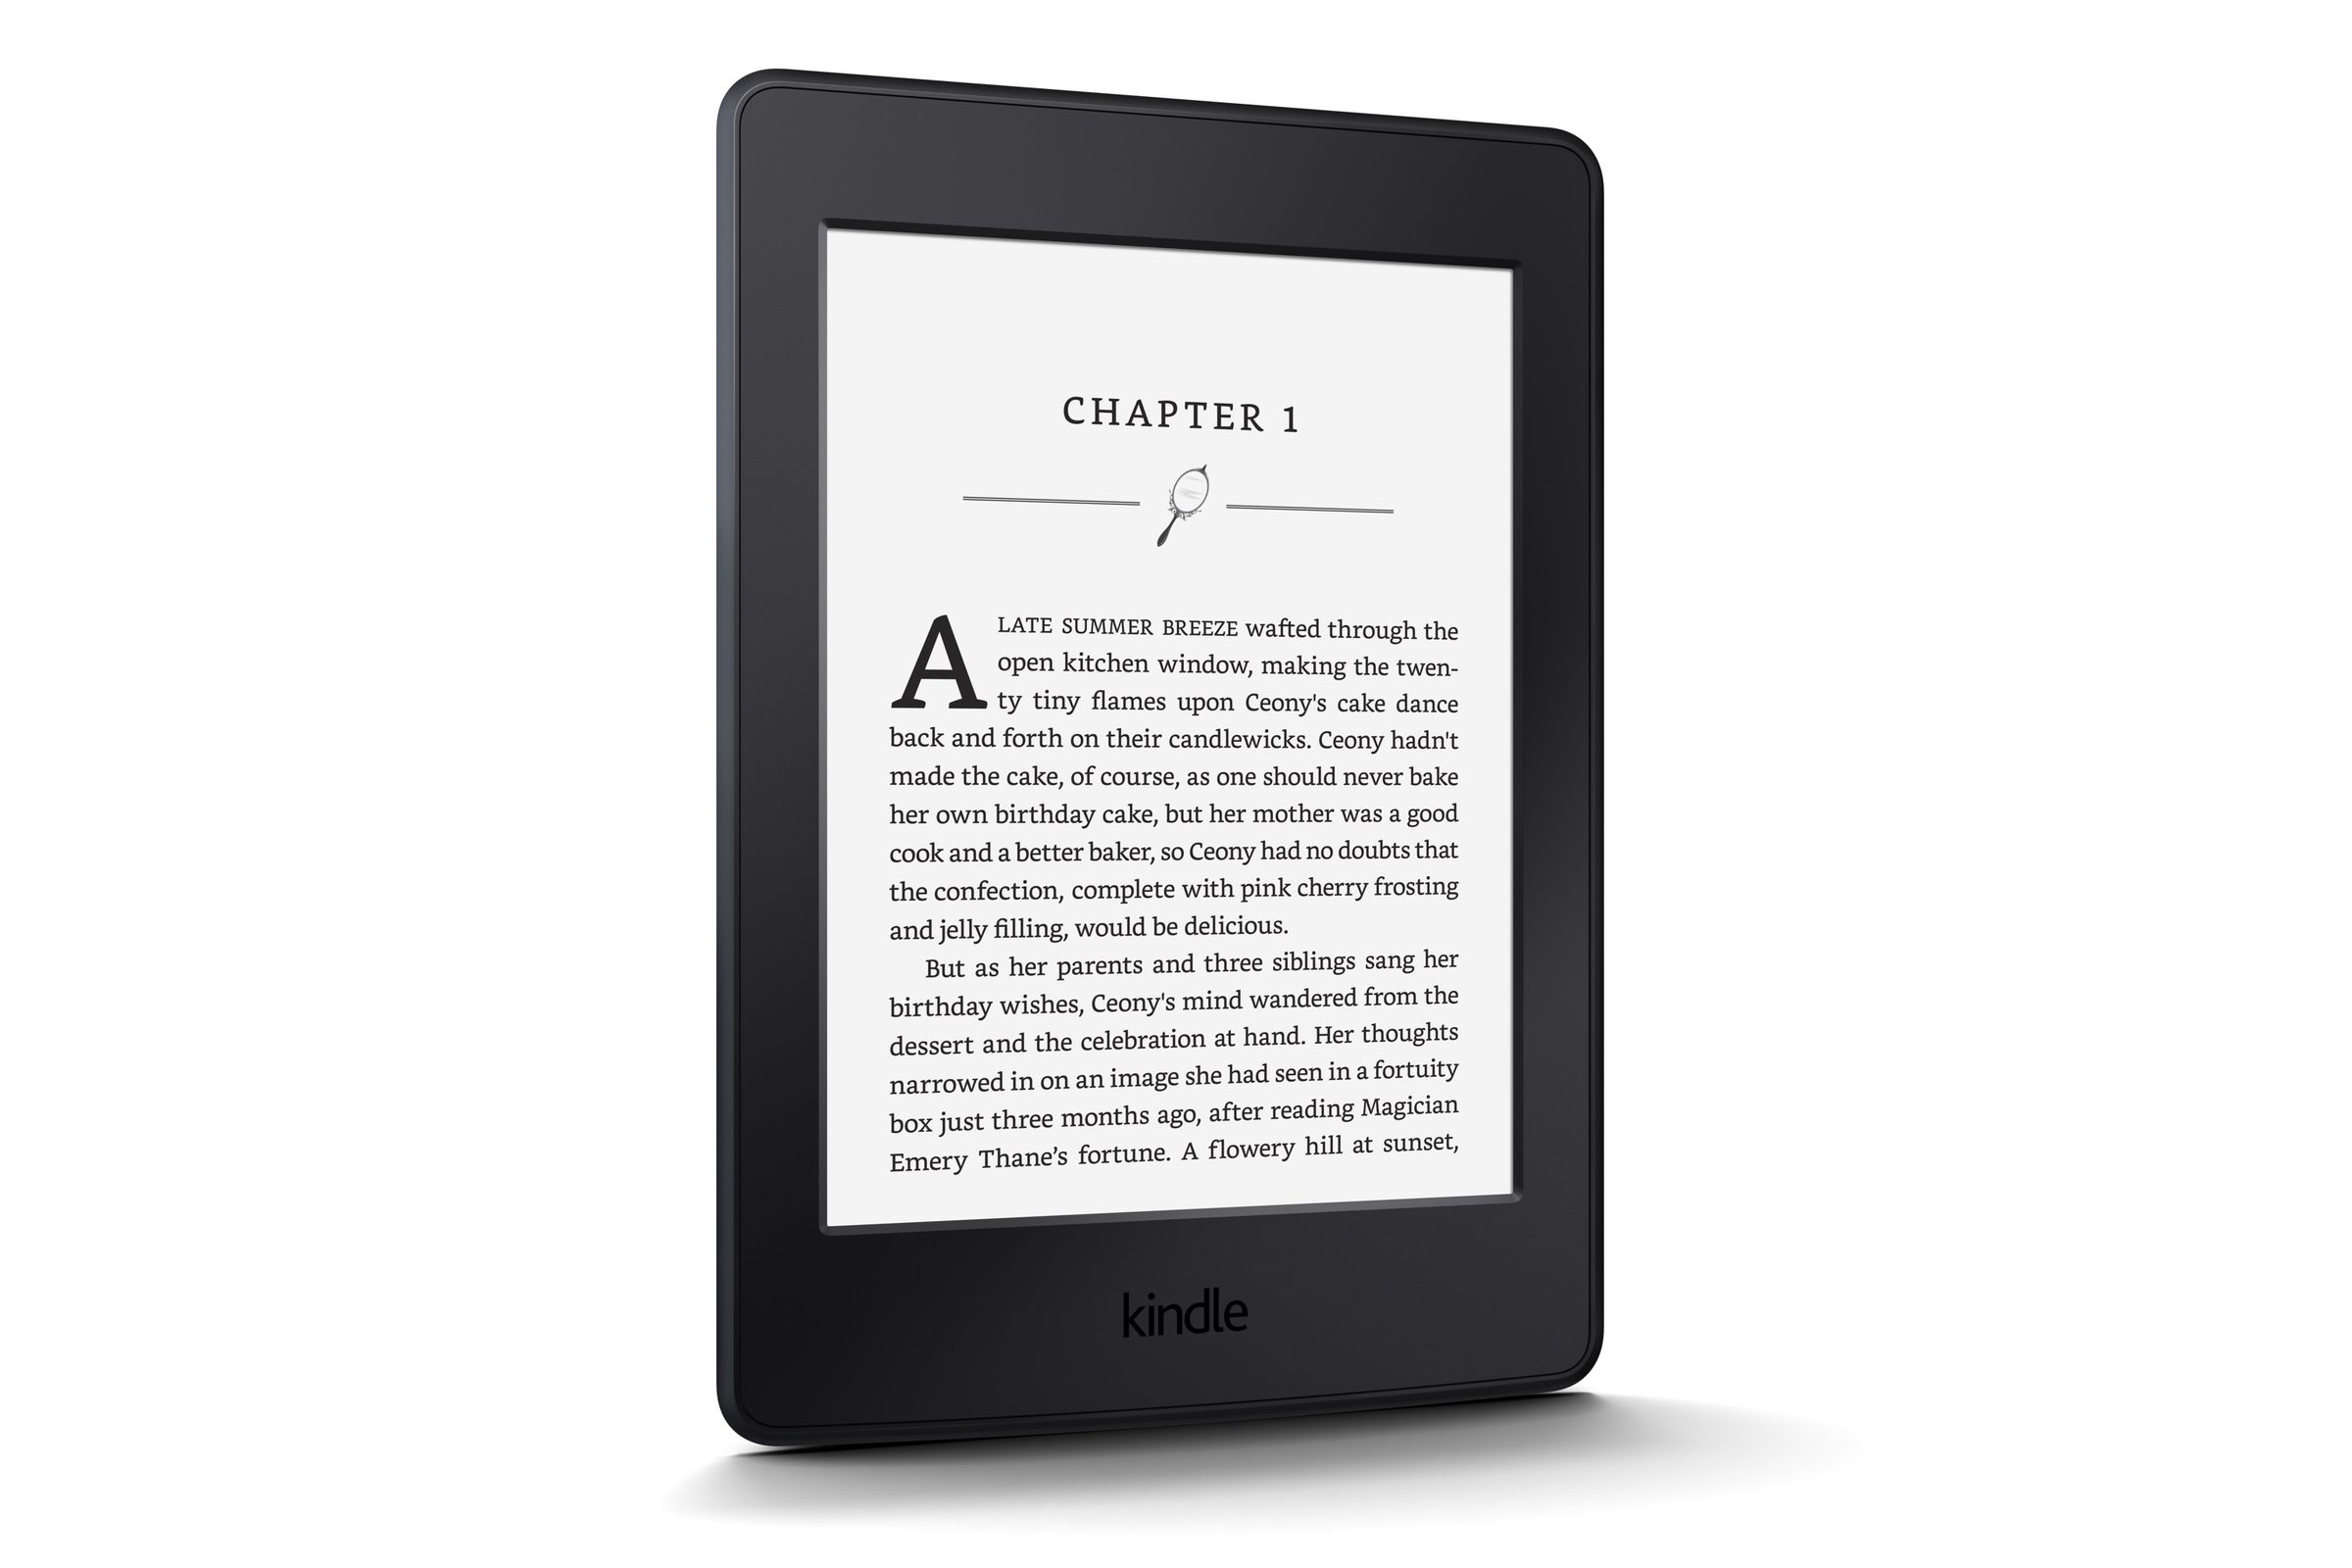 Amazon announces new Kindle Paperwhite with a highresolution screen